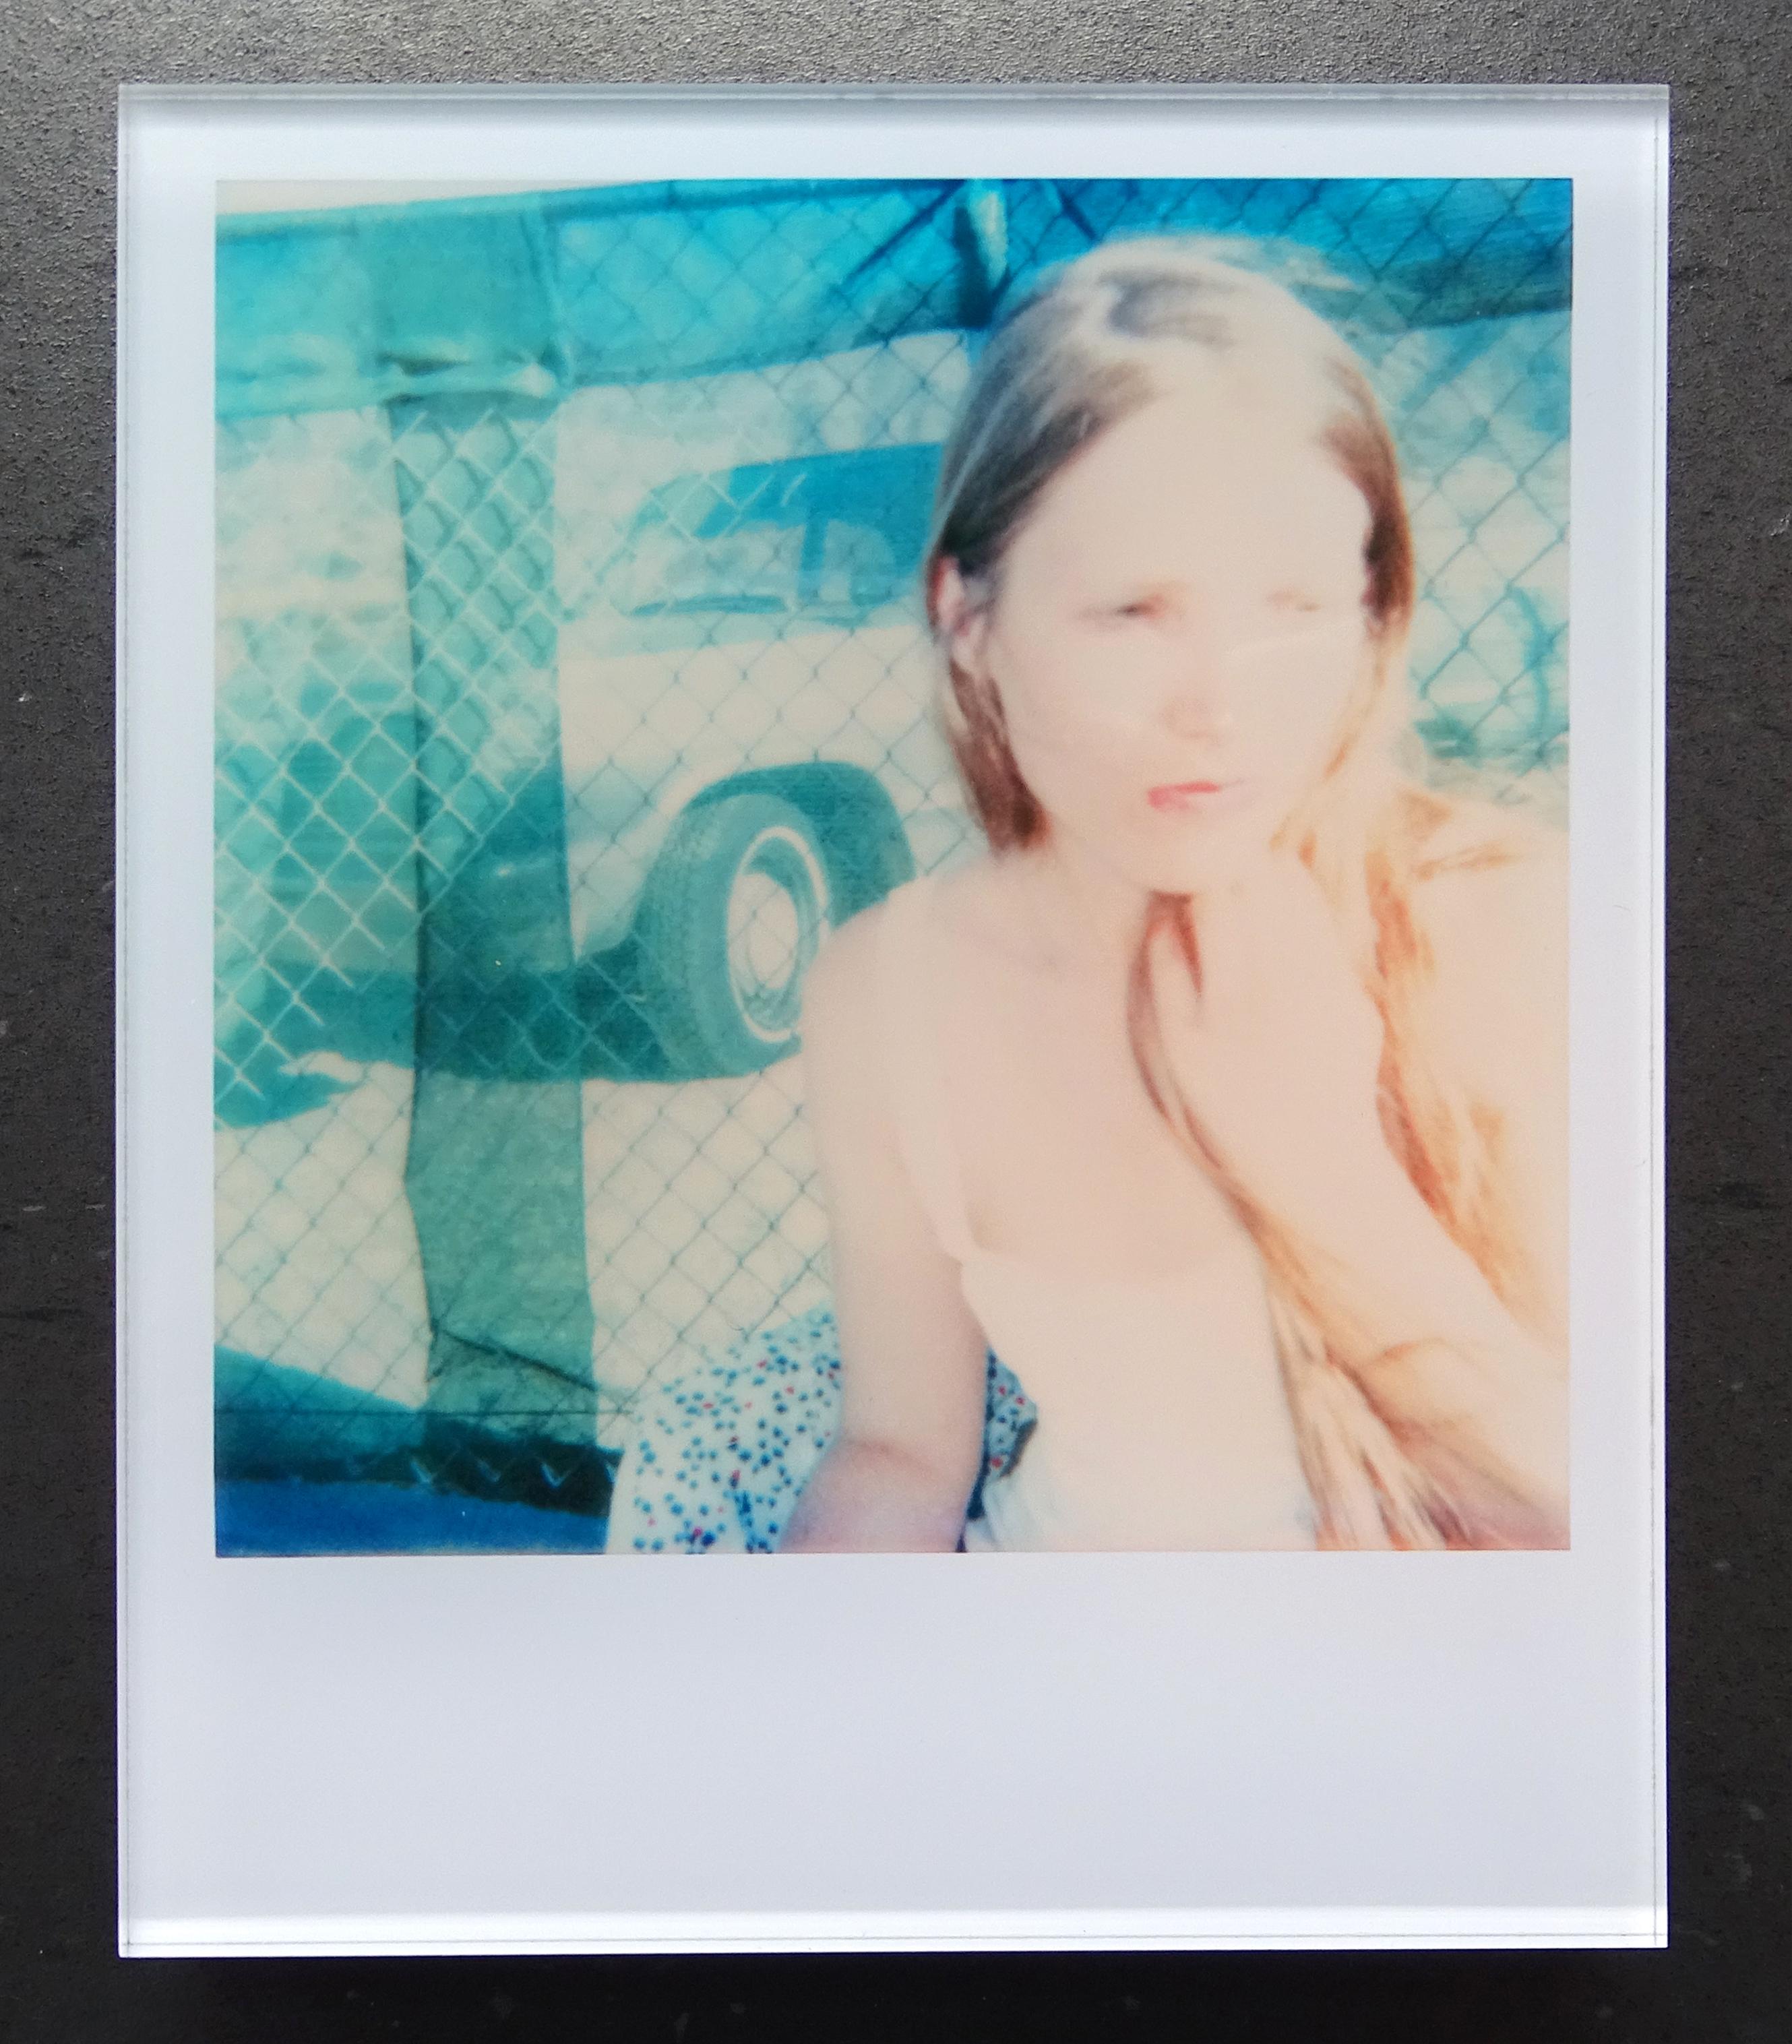 Stefanie Schneider's Minis
'29 Day Dreams' (29 Palms, CA), 2005
signed and signature brand on verso
Lambda digital Color Photographs based on the Polaroid

Polaroid sized open Editions 1999-2013
10.7 x 8.8cm (Image 7.9x7.7cm)
mounted: sandwiched in